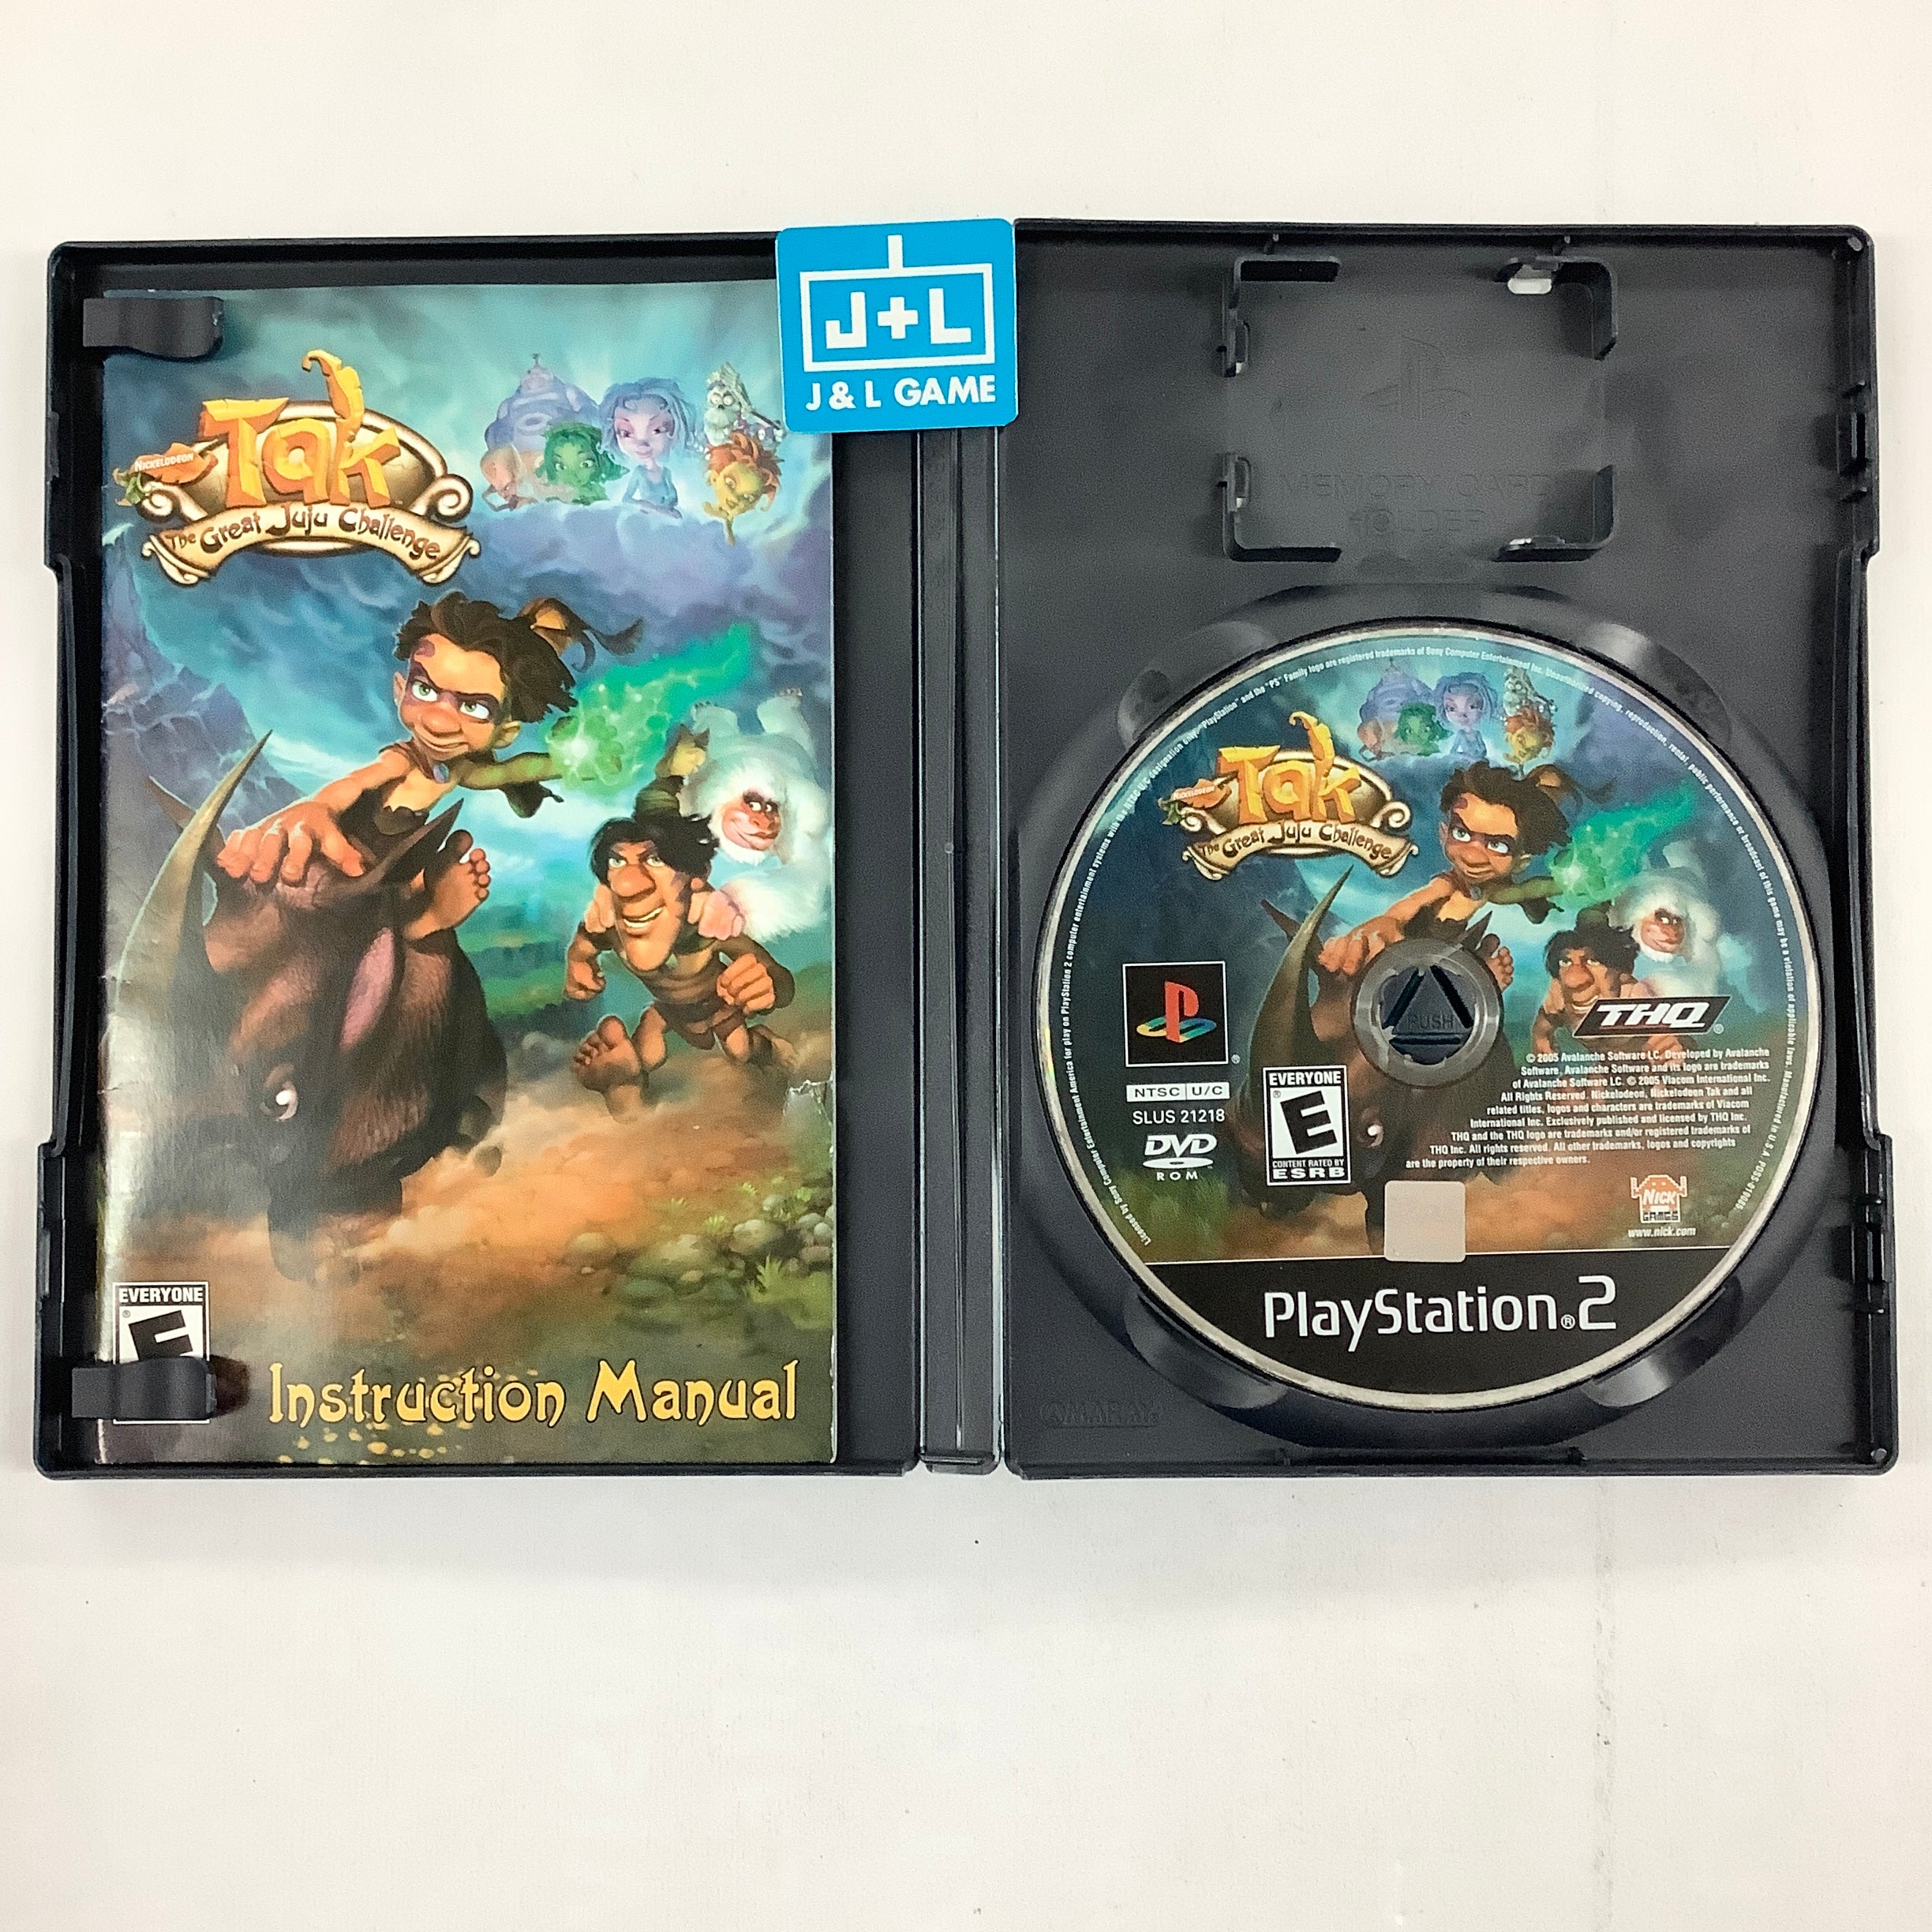 Tak: The Great Juju Challenge - (PS2) PlayStation 2 [Pre-Owned] Video Games THQ   